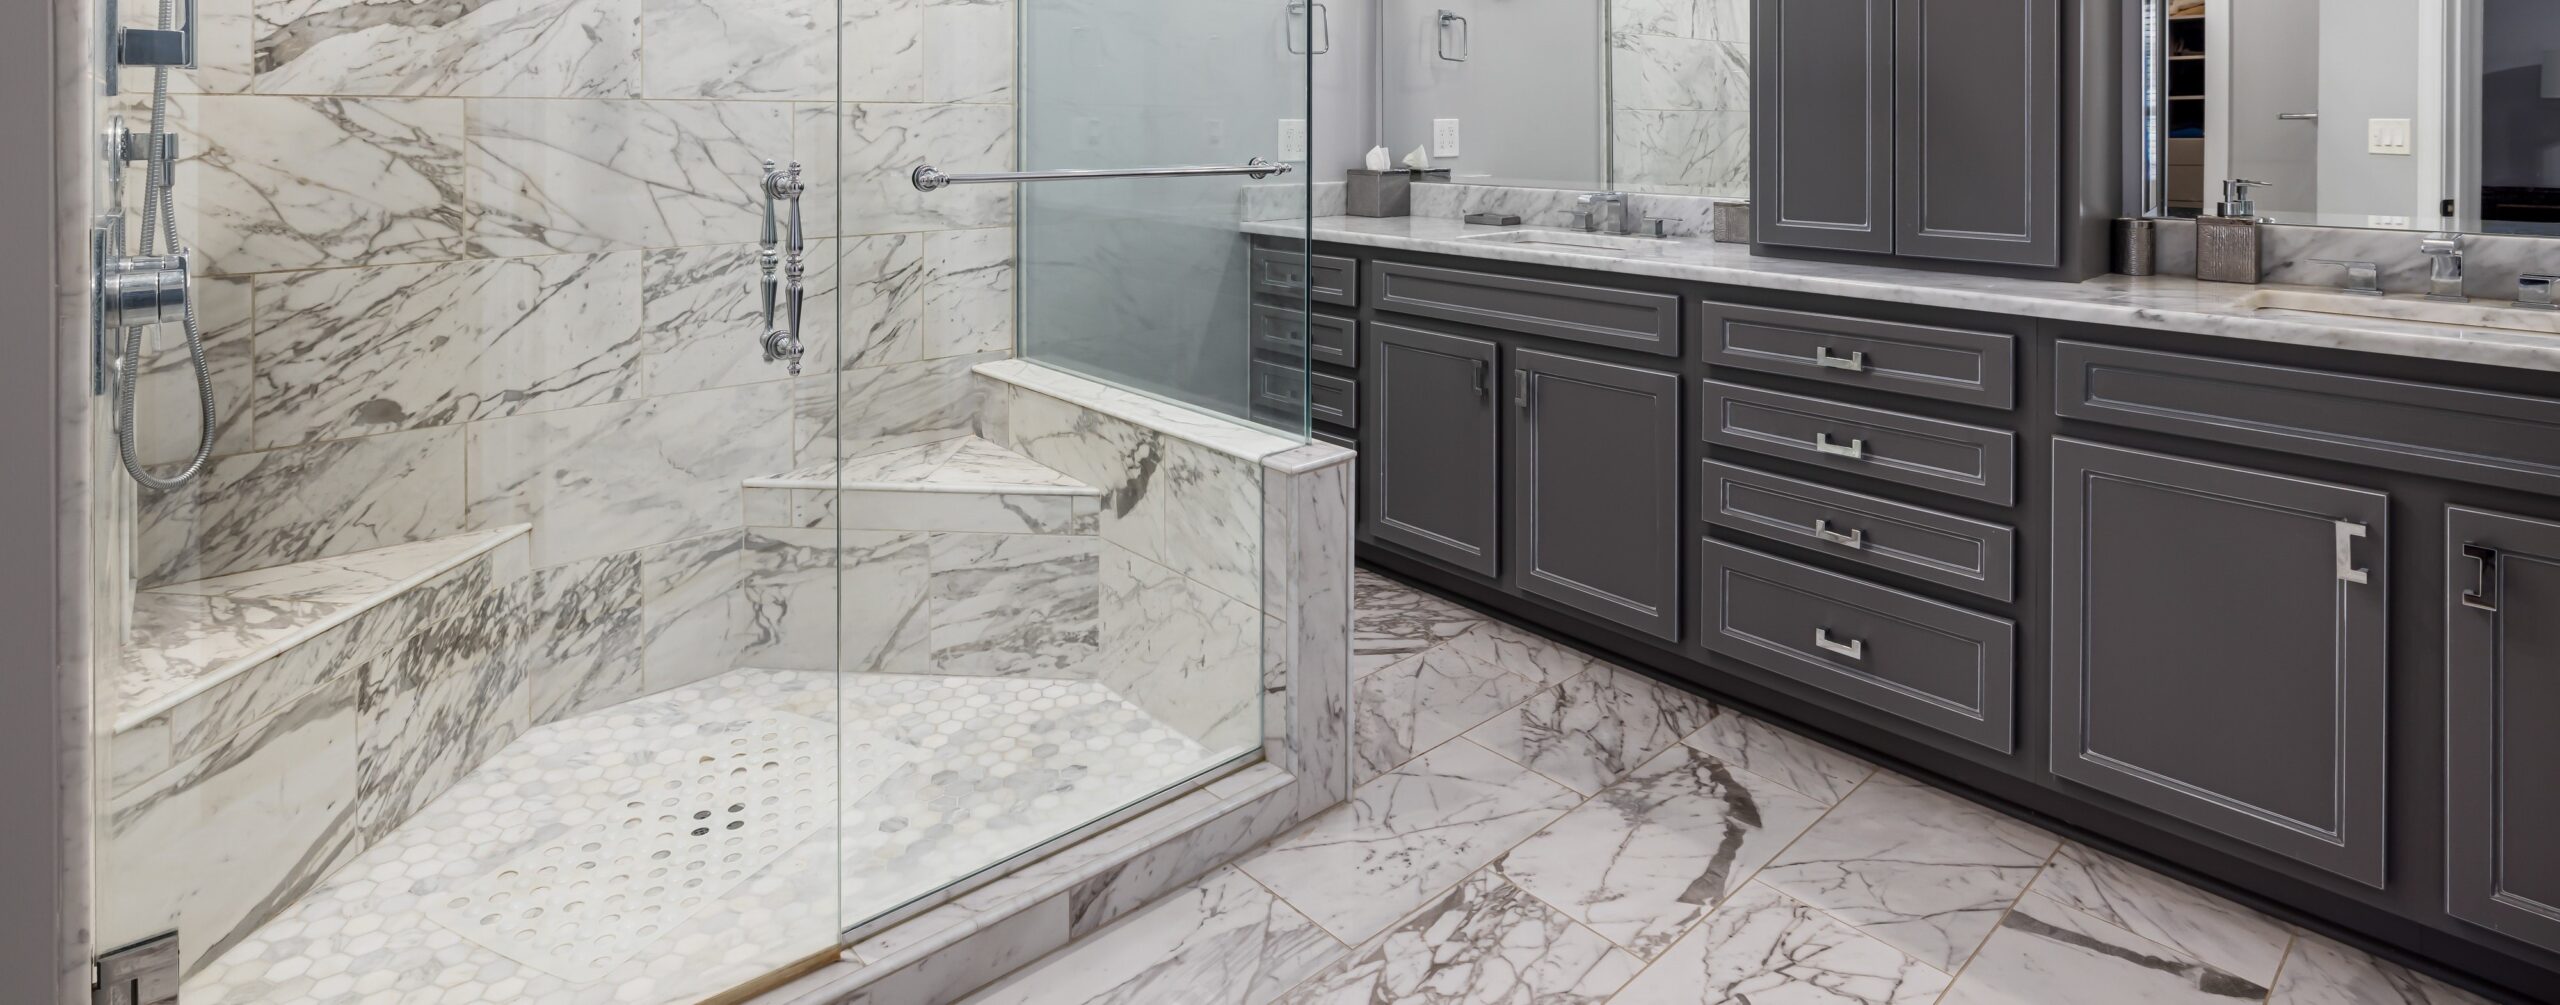 Primary baths are a great place to show off natural stone, whether in showers, on floors or on countertops.